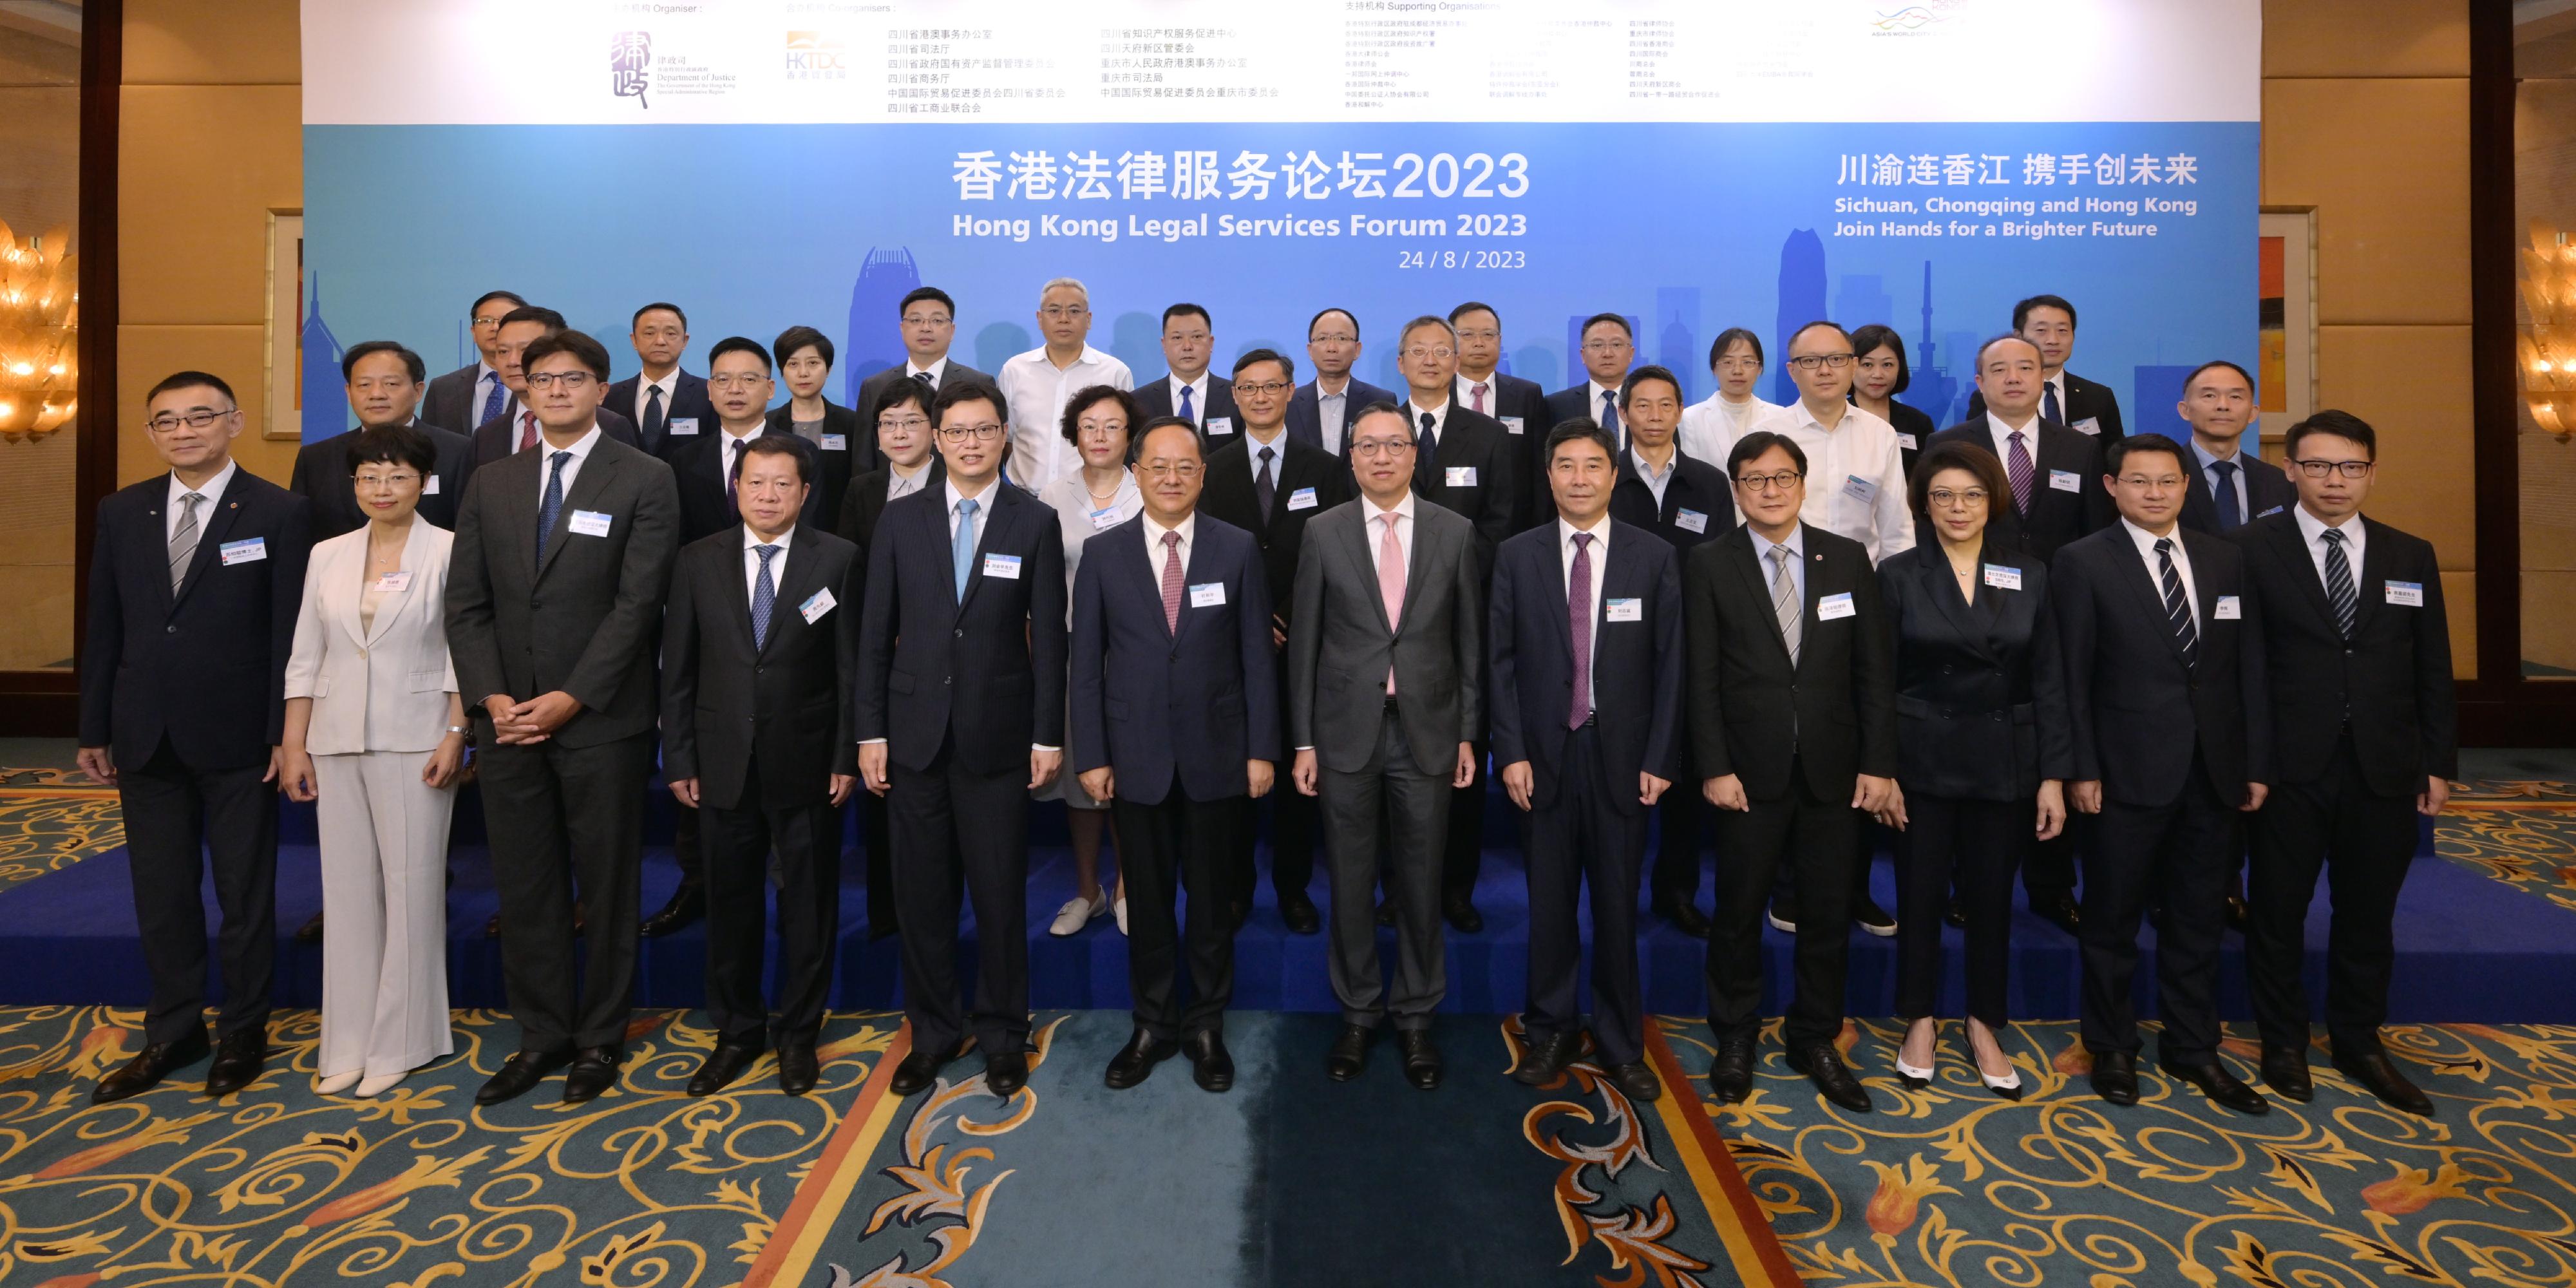 The Secretary for Justice, Mr Paul Lam, SC, led a Hong Kong legal and dispute resolution sector delegation to attend the sixth Hong Kong Legal Services Forum organised by the Department of Justice and co-organised by the Hong Kong Trade Development Council today (August 24) in Chengdu. Photo shows Mr Lam (front row, sixth right) with Vice-Chairman of the Sichuan Provincial Committee of the Chinese People's Political Consultative Conference Mr Du Heping (front row, sixth left); Deputy Executive Director of the Hong Kong Trade Development Council Mr Patrick Lau (front row, fifth left); Vice-Chairman of the Hong Kong Bar Association Mr José-Antonio Maurellet, SC (front row, third left); the President of the Law Society of Hong Kong, Mr Chan Chak-ming (front row, fourth right); Recorder of the Court of First Instance of the High Court of Hong Kong Special Administrative Region and former Chairman of the Hong Kong Bar Association, Ms Winnie Tam, SC (front row, third right), and other guests at the event.